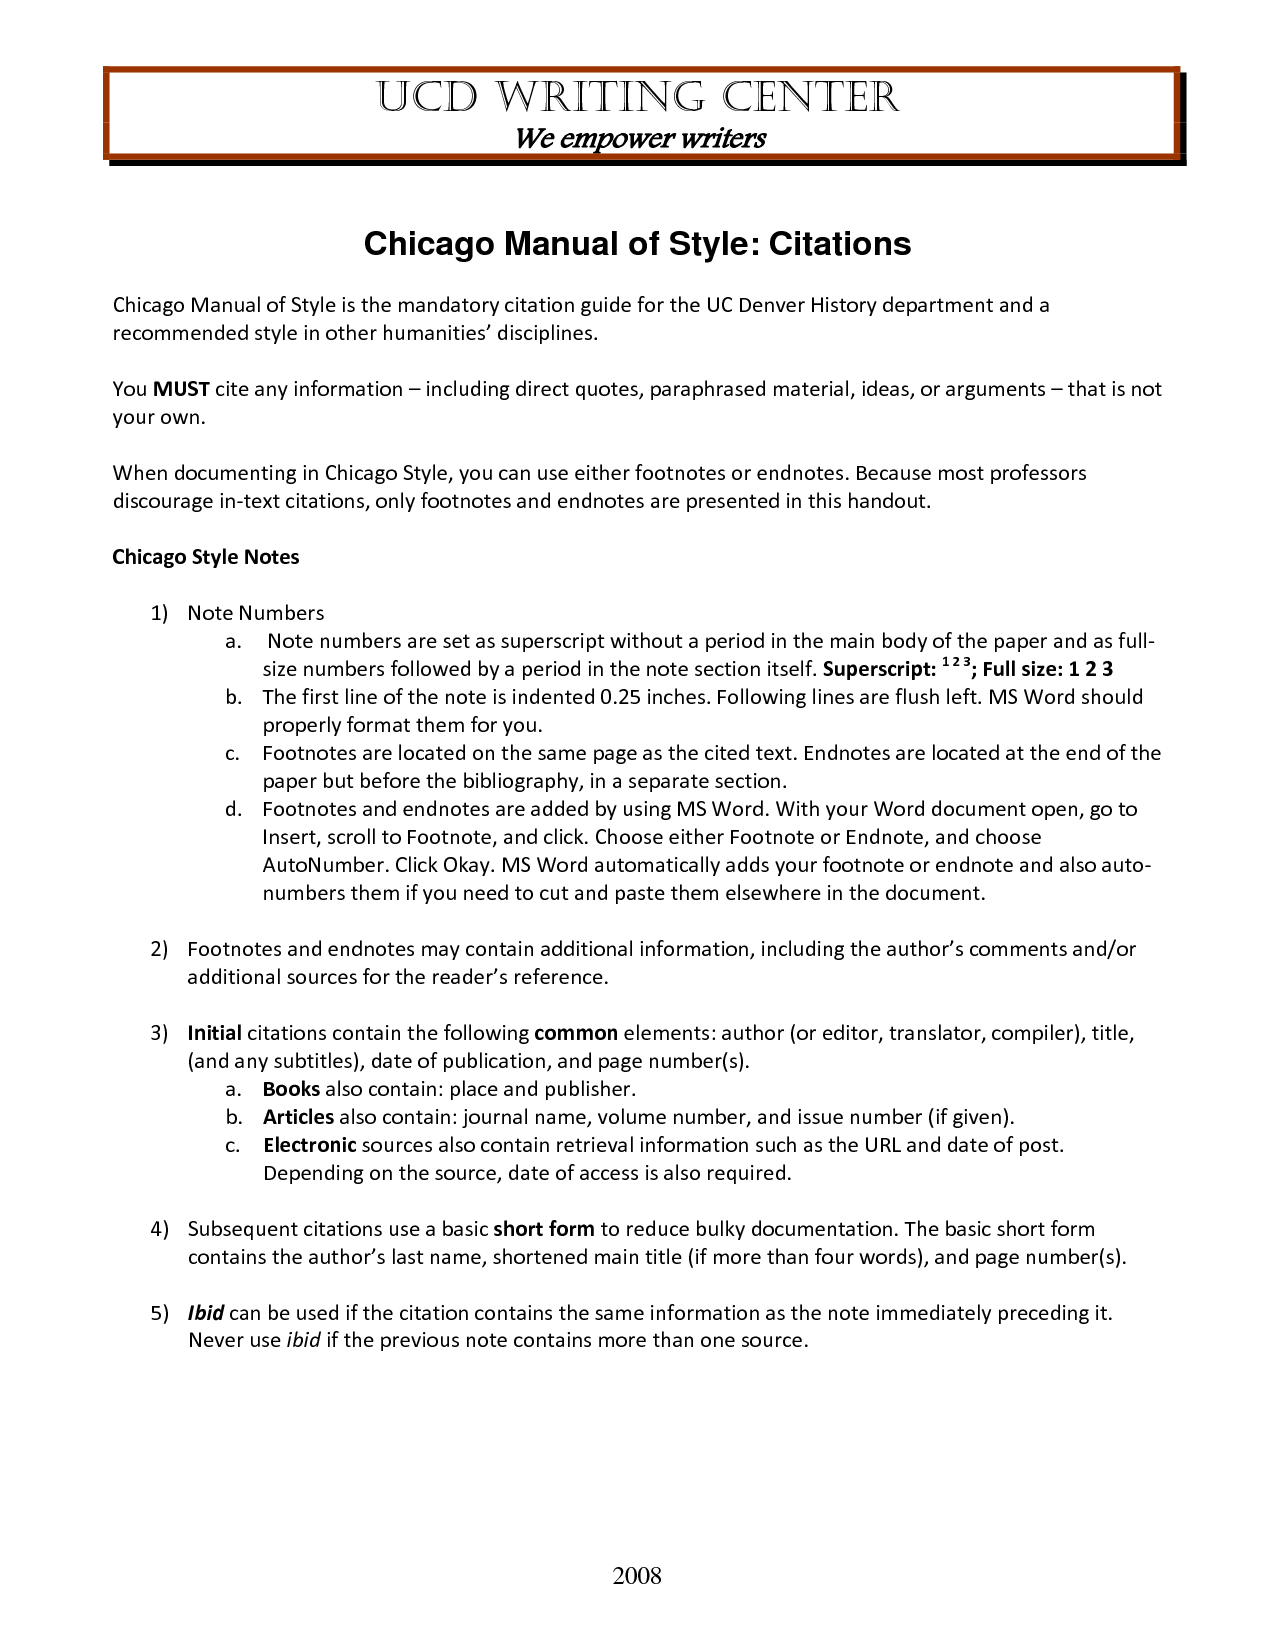 Chicago manual of style bibliography generator